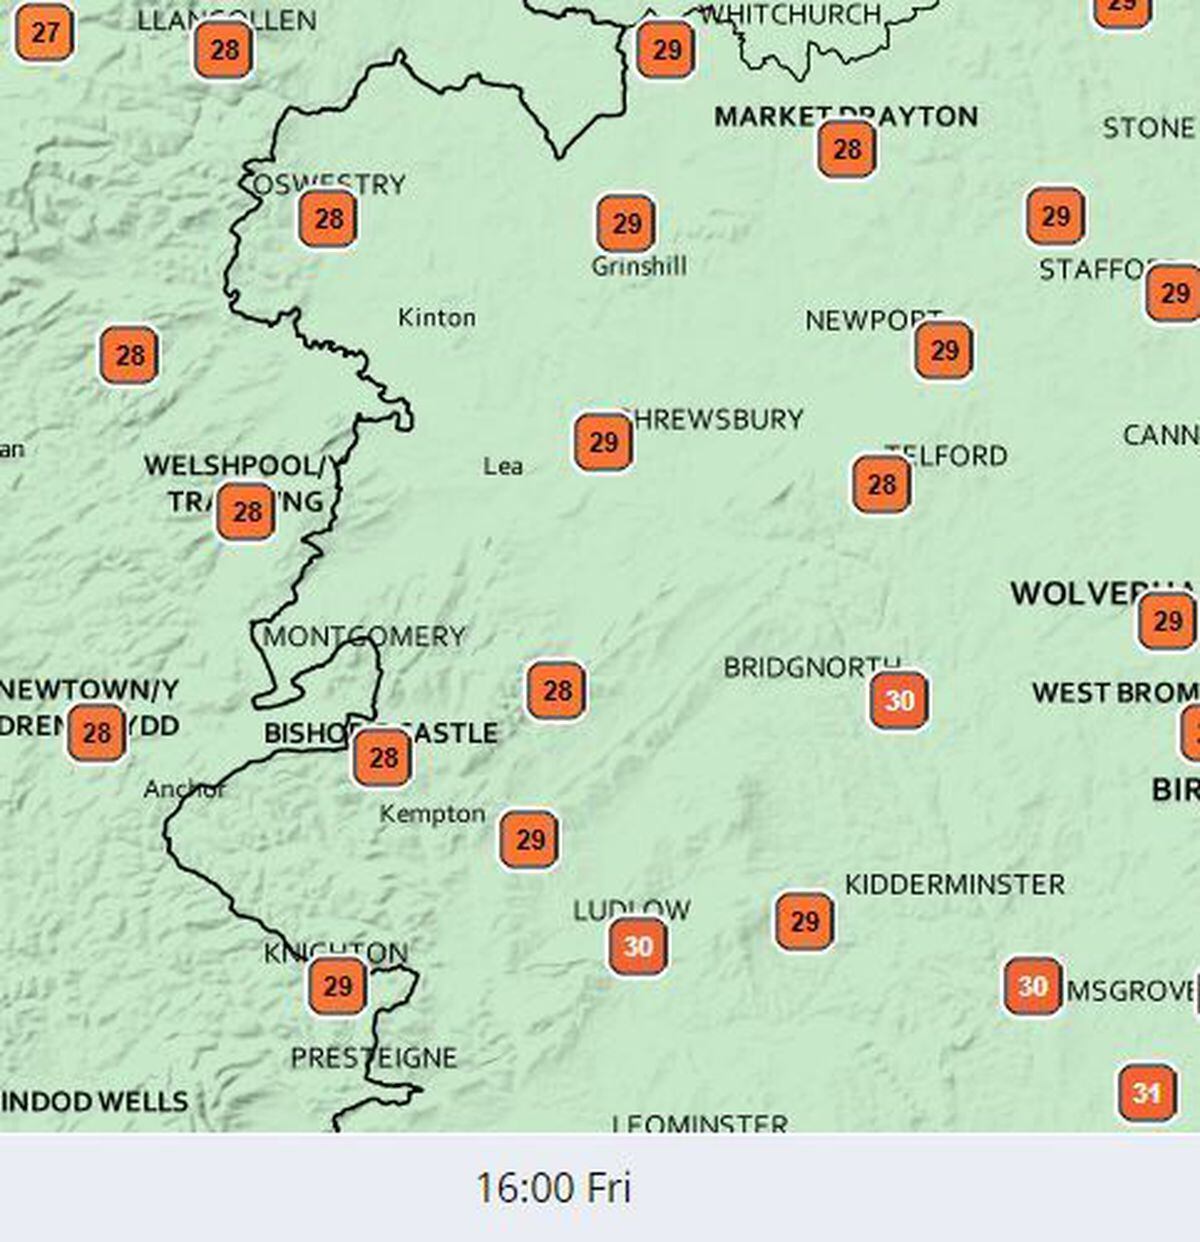 Some of the peak temperatures expected in Shropshire towns on Friday afternoon. Data: Met Office